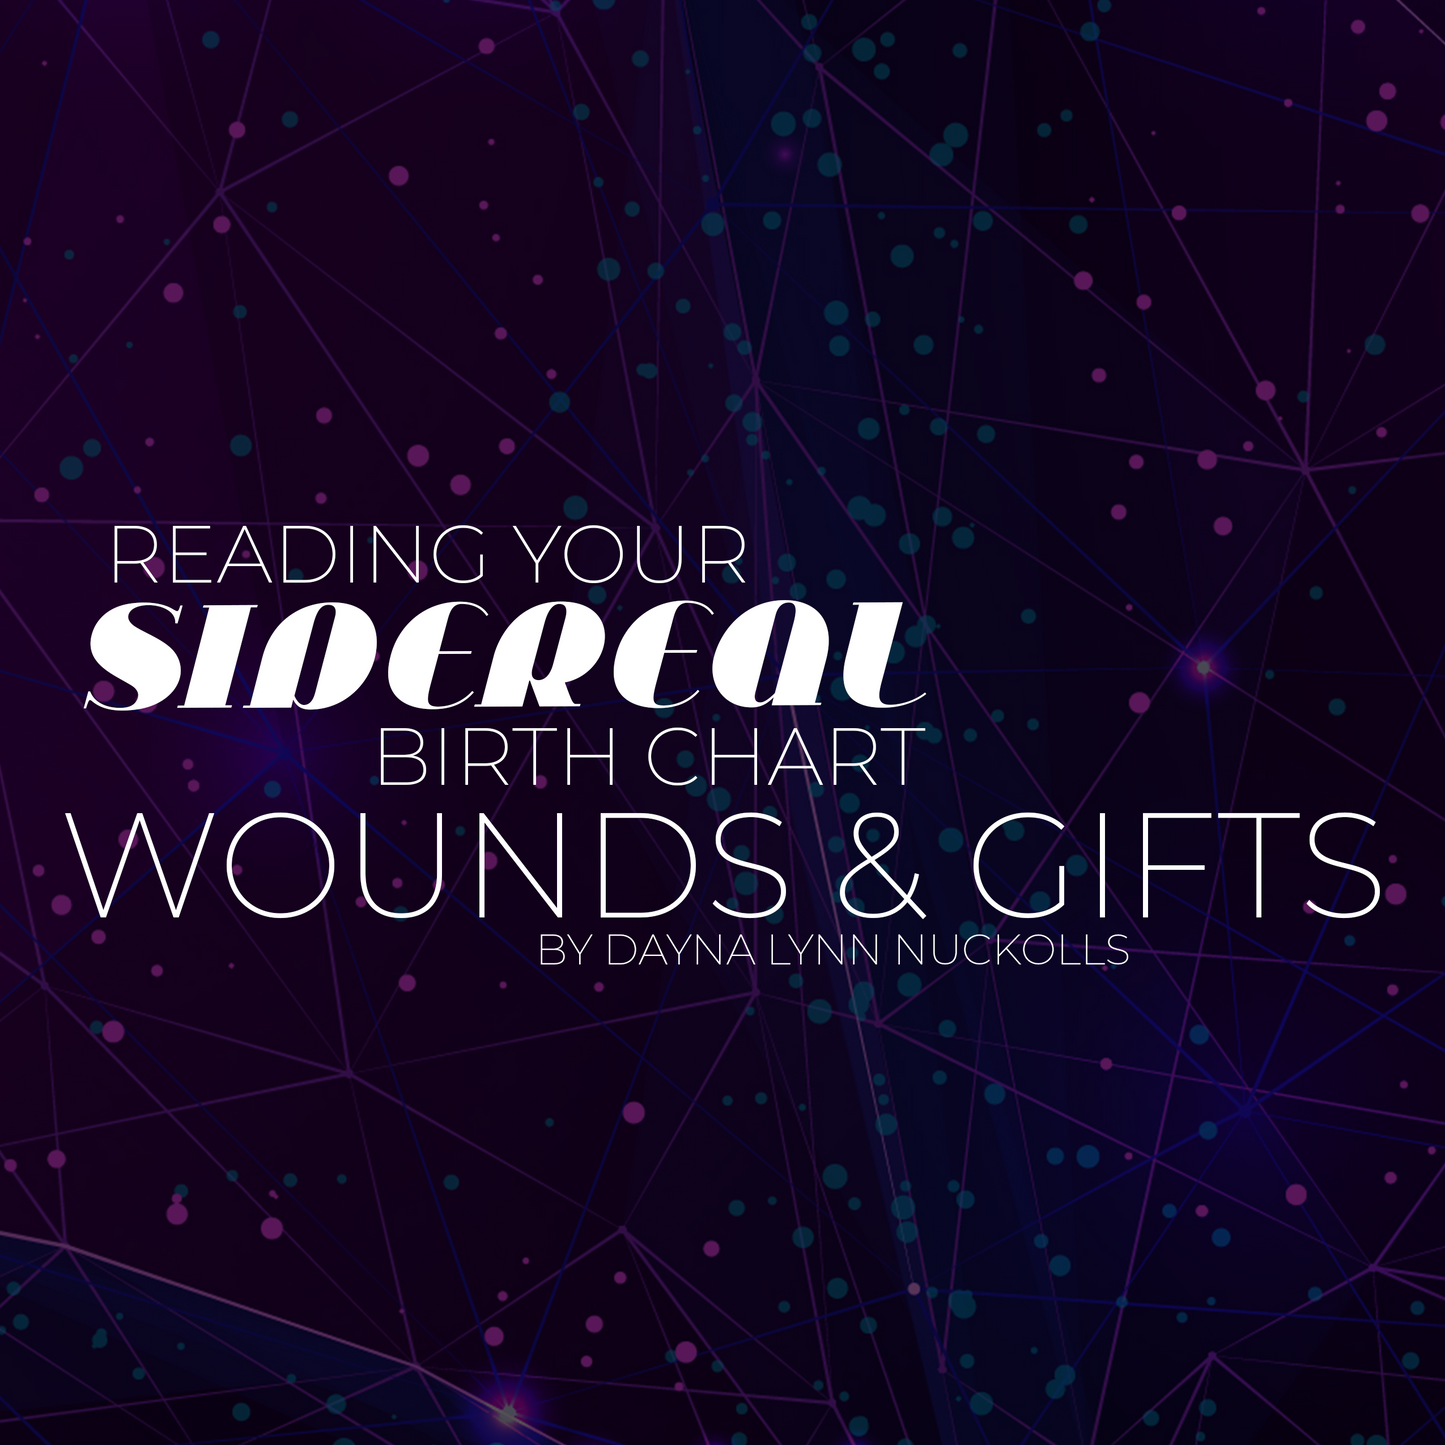 Wounds & Gifts Workshop